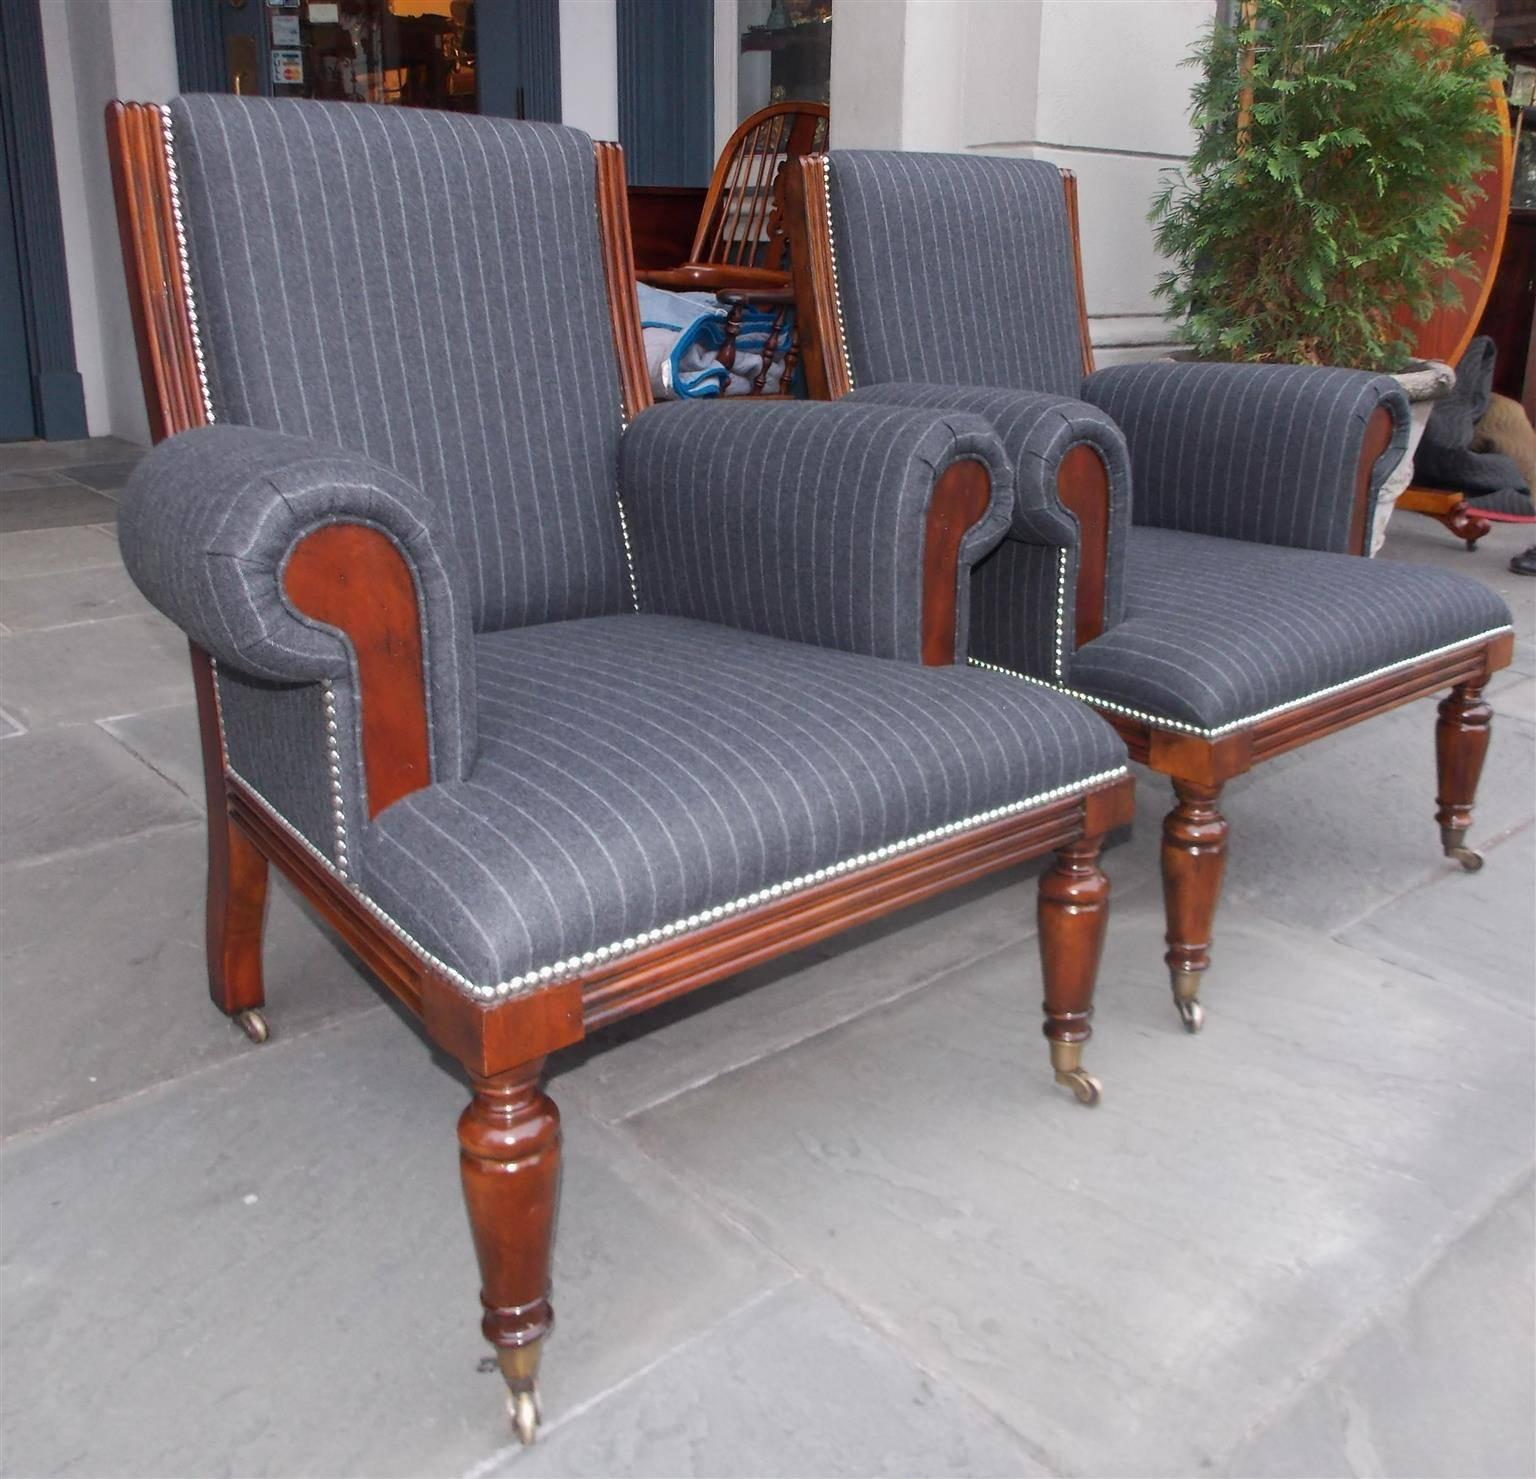 Pair of American mahogany club chairs with carved reeded backs, scrolled arms, nickel tacking, and terminating on turned bulbous legs with original brass casters.  20th Century.  Chairs are upholstered in a pin strip wool fabric.  